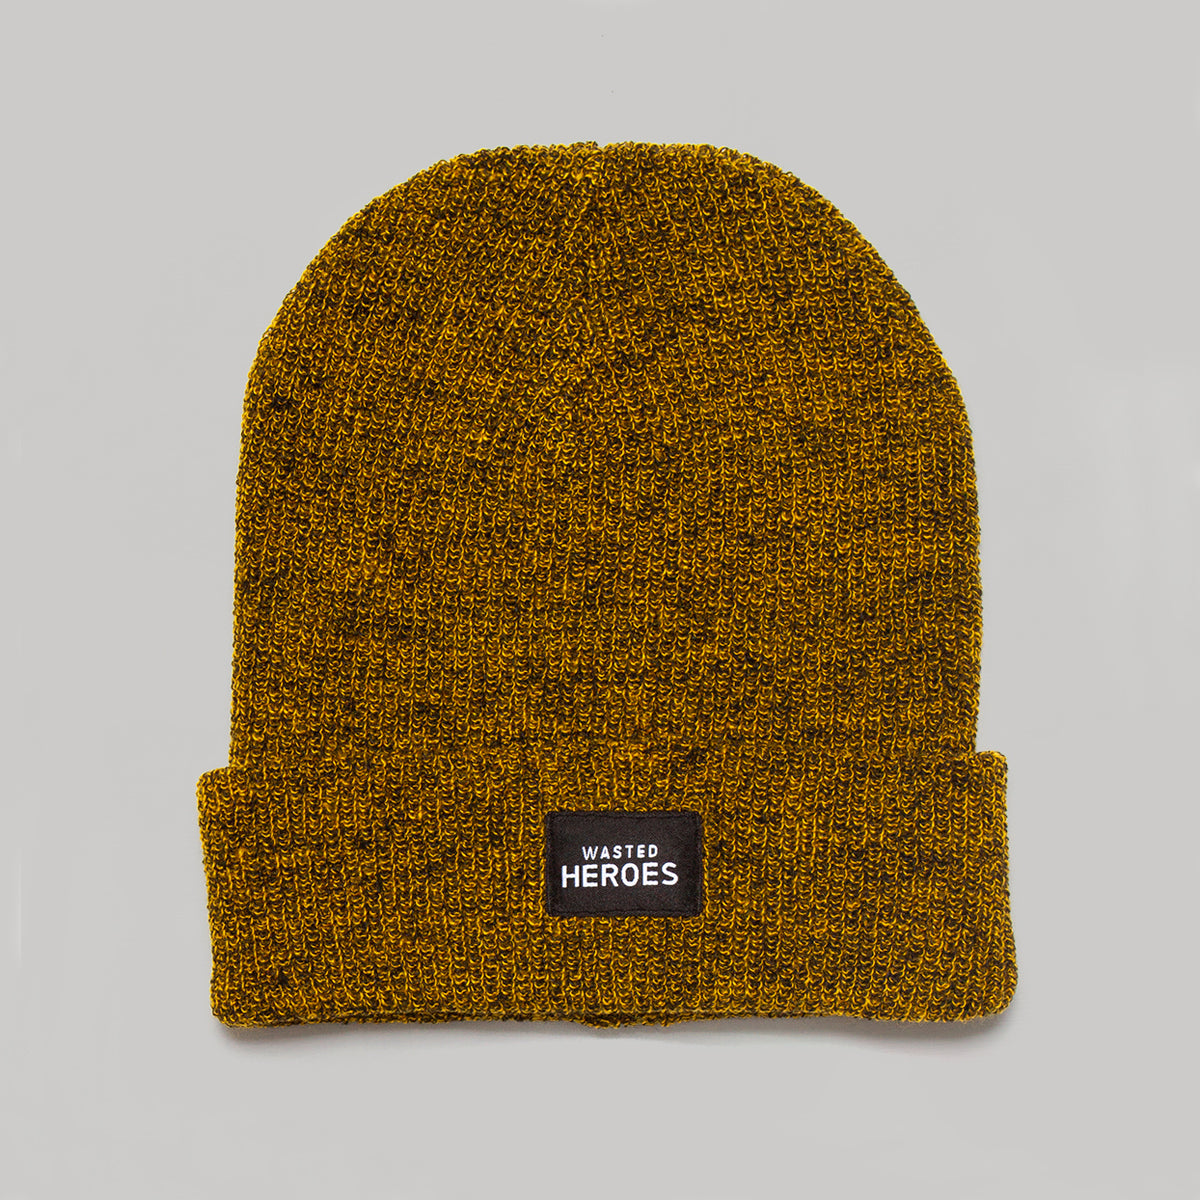 Wasted Heroes - Beanie - Mustard - Wasted Heroes